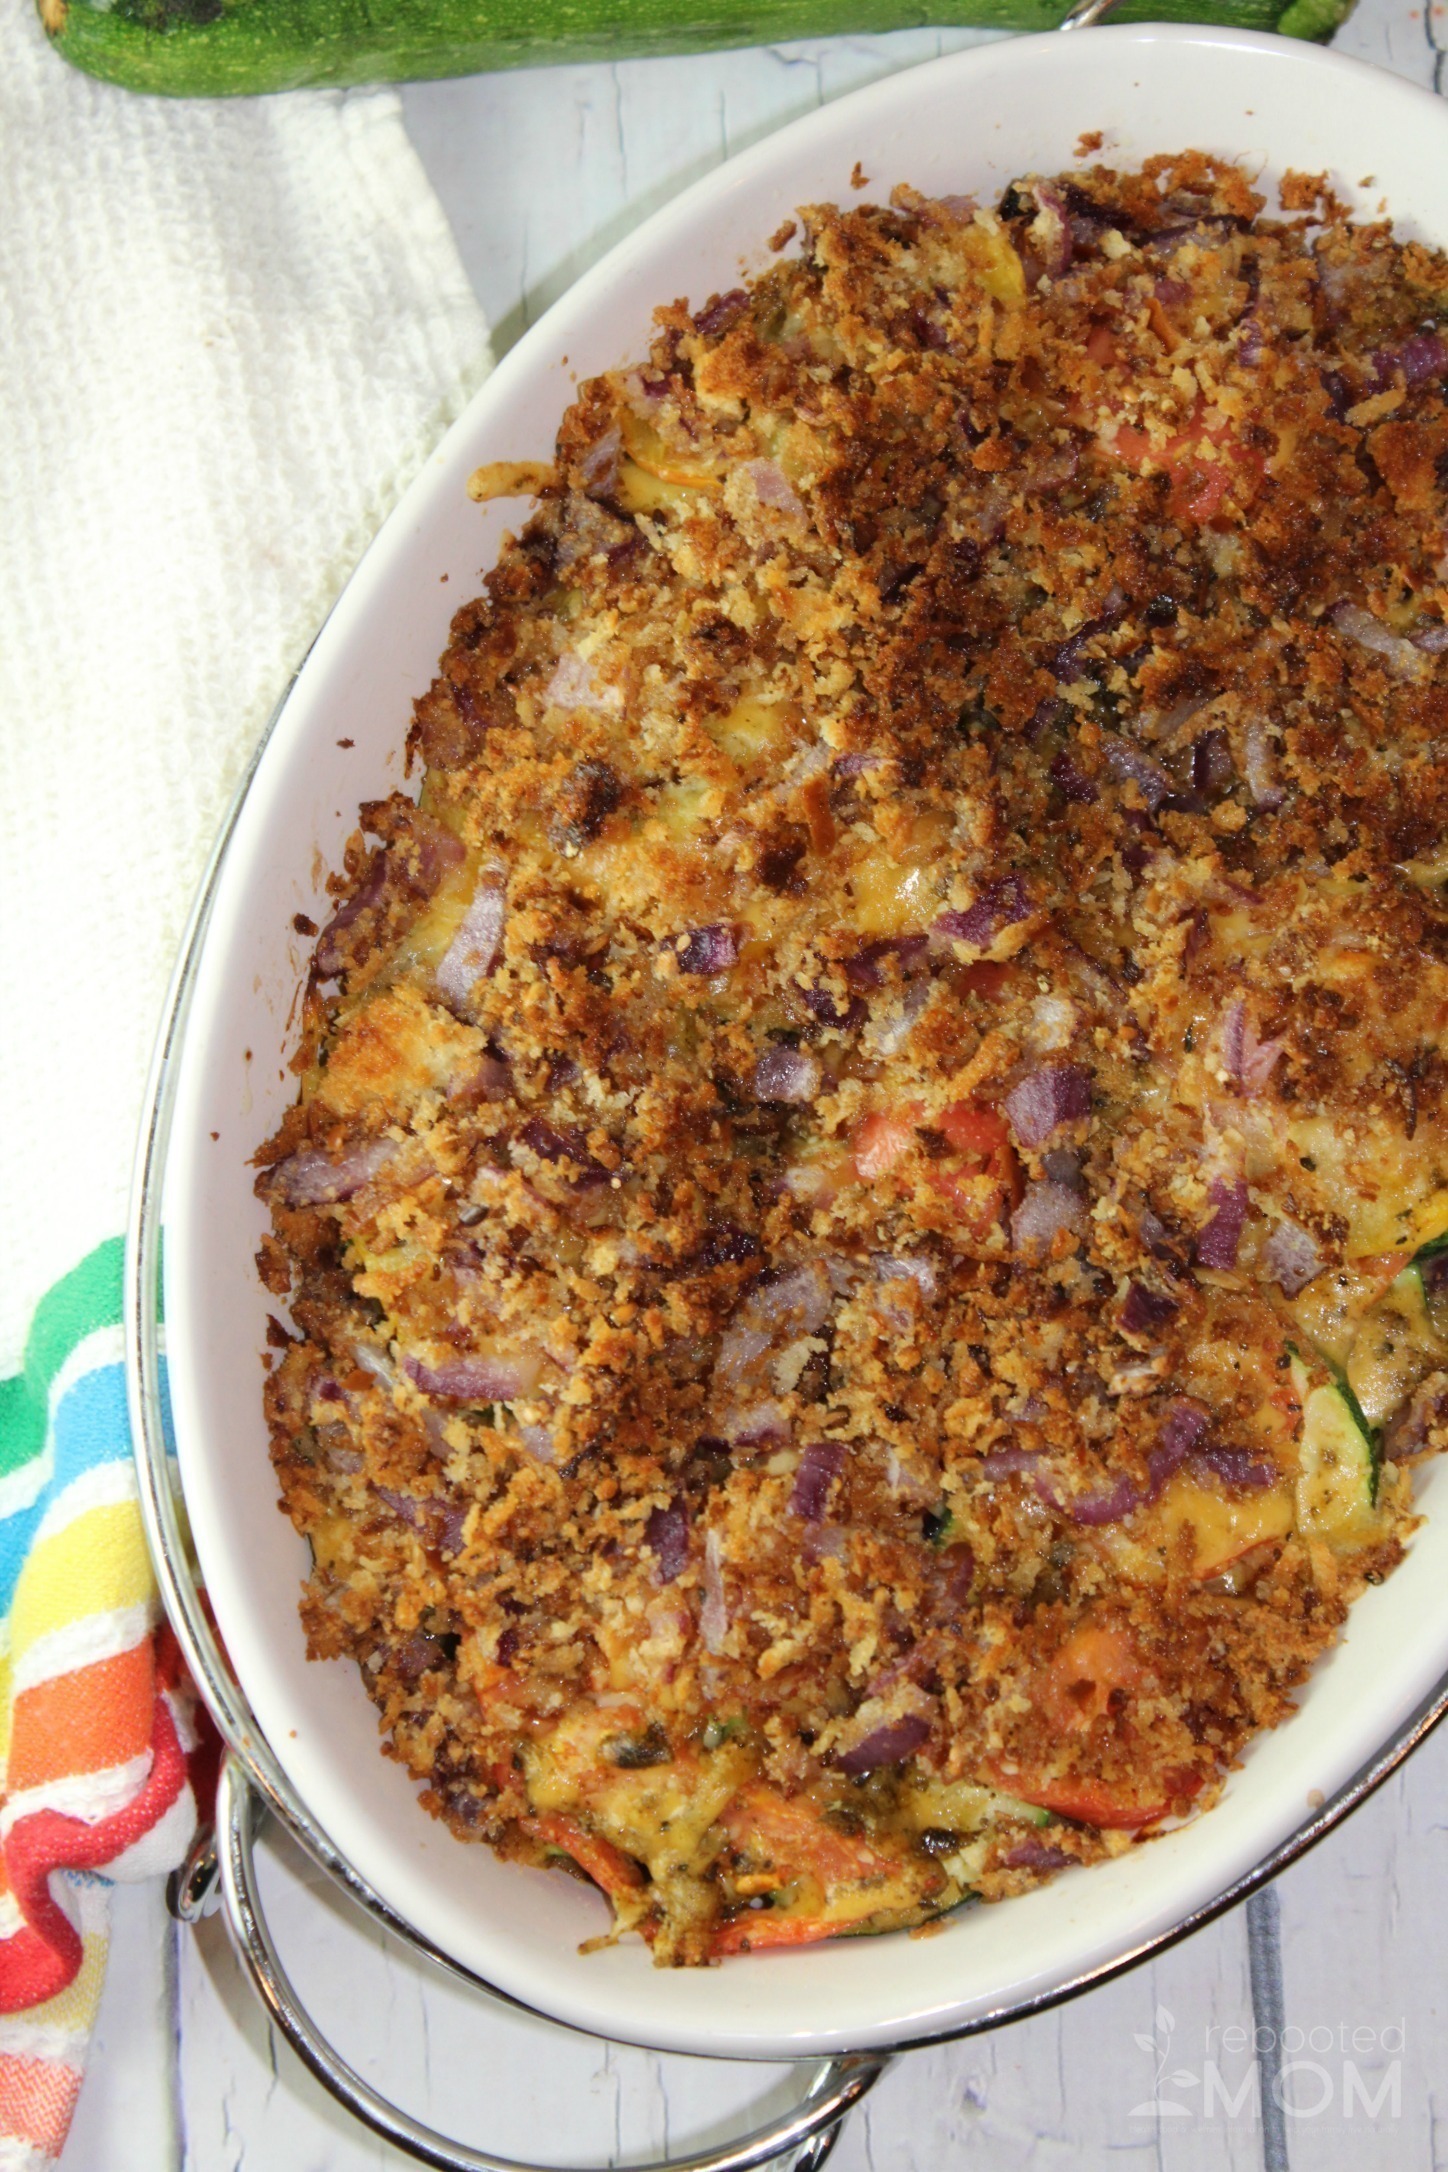 This easy Zucchini Tomato Casserole is a simple side dish that highlights an abundance of zucchini and tomatoes in a meatless dish that's perfect as a main or as a side.